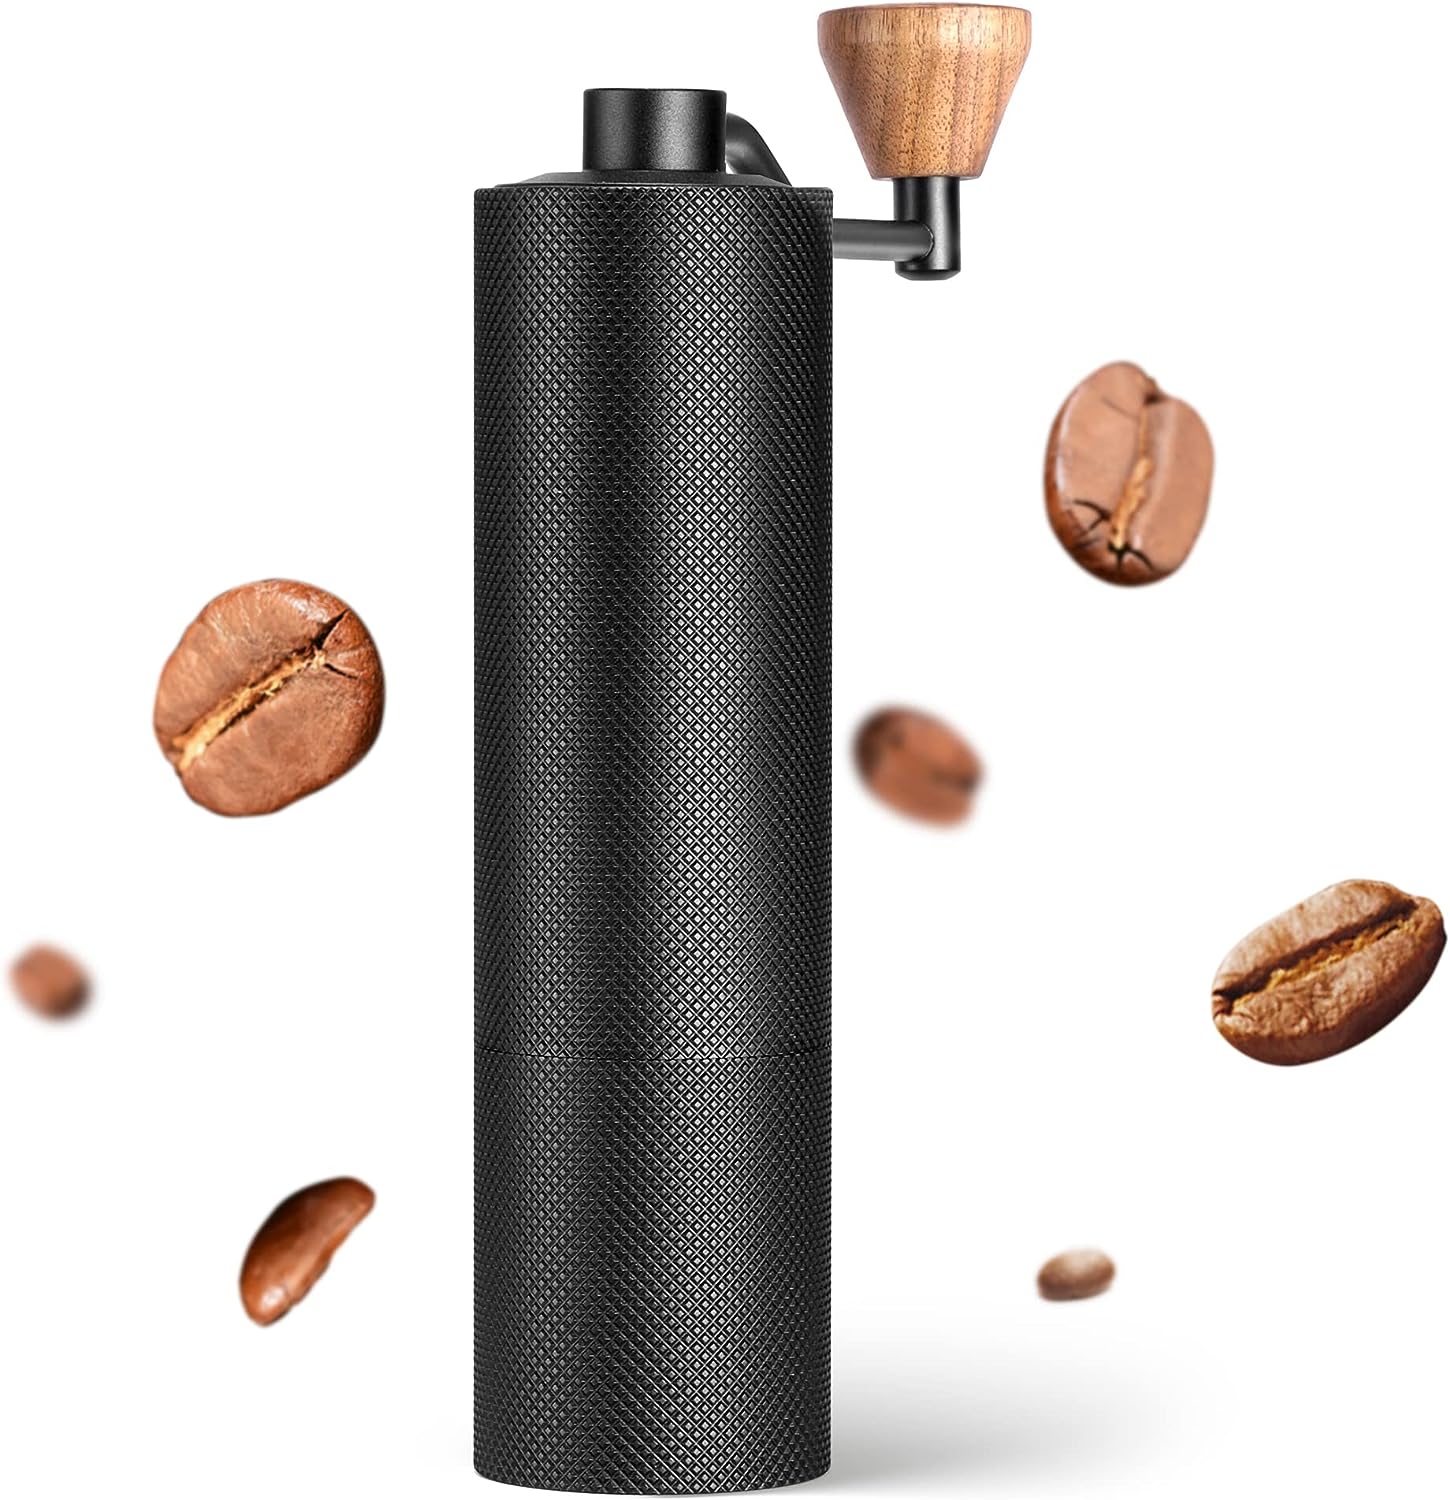 TIMEMORE Chestnut Slim 3 Coffee Grinder, Manual Hand Coffee Grinder, Stainless Steel Coffee Grinder with S2C Cone Grinder, for Filter Coffee